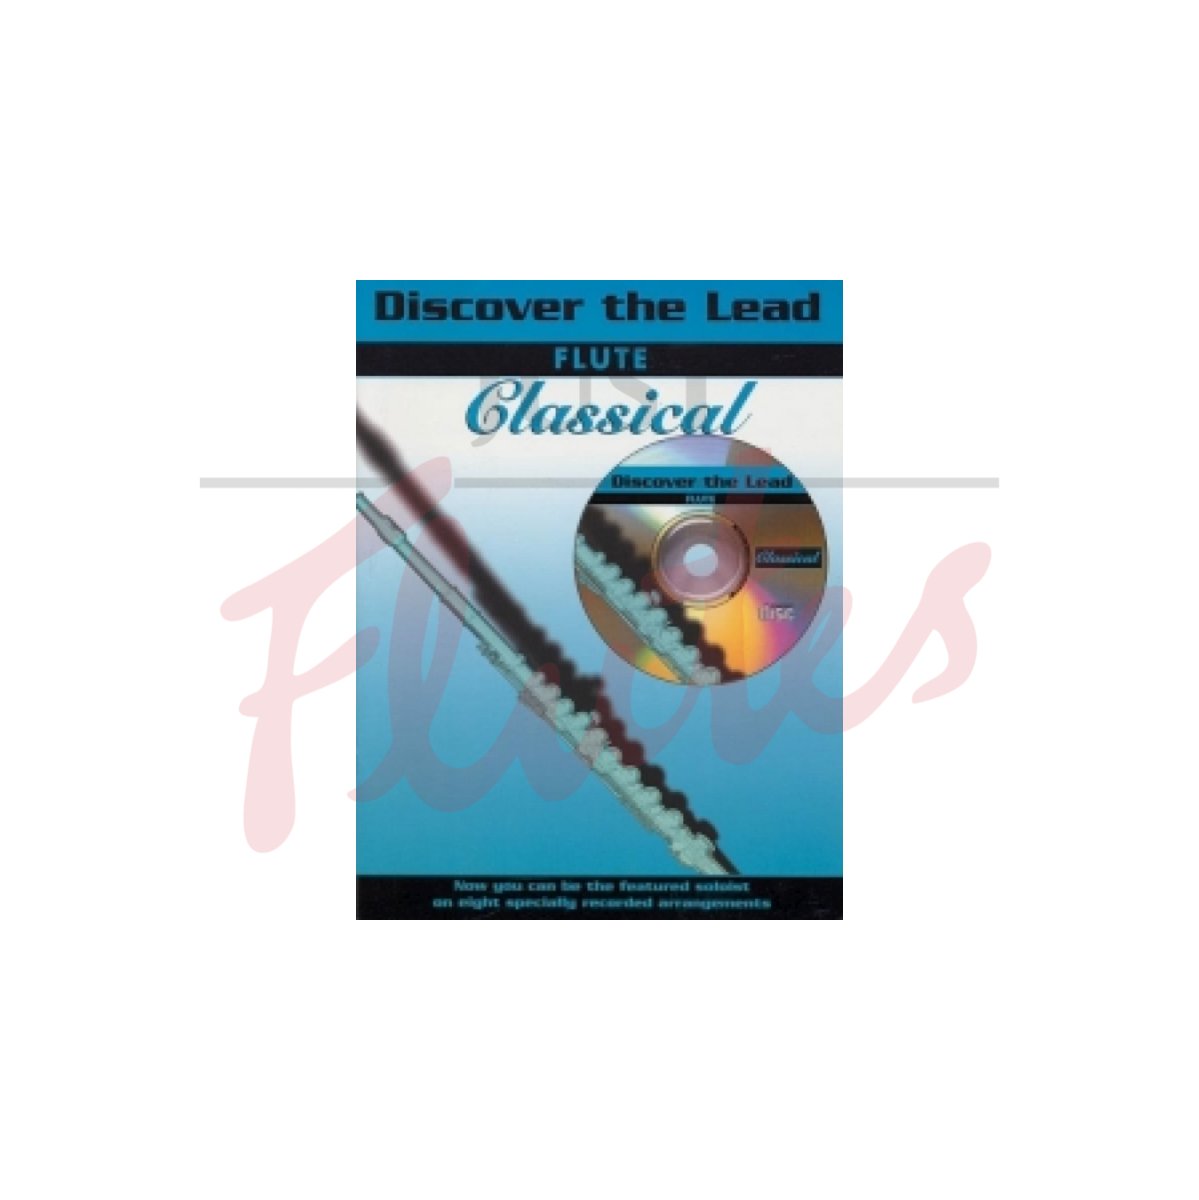 Discover the Lead: Classical [Flute]